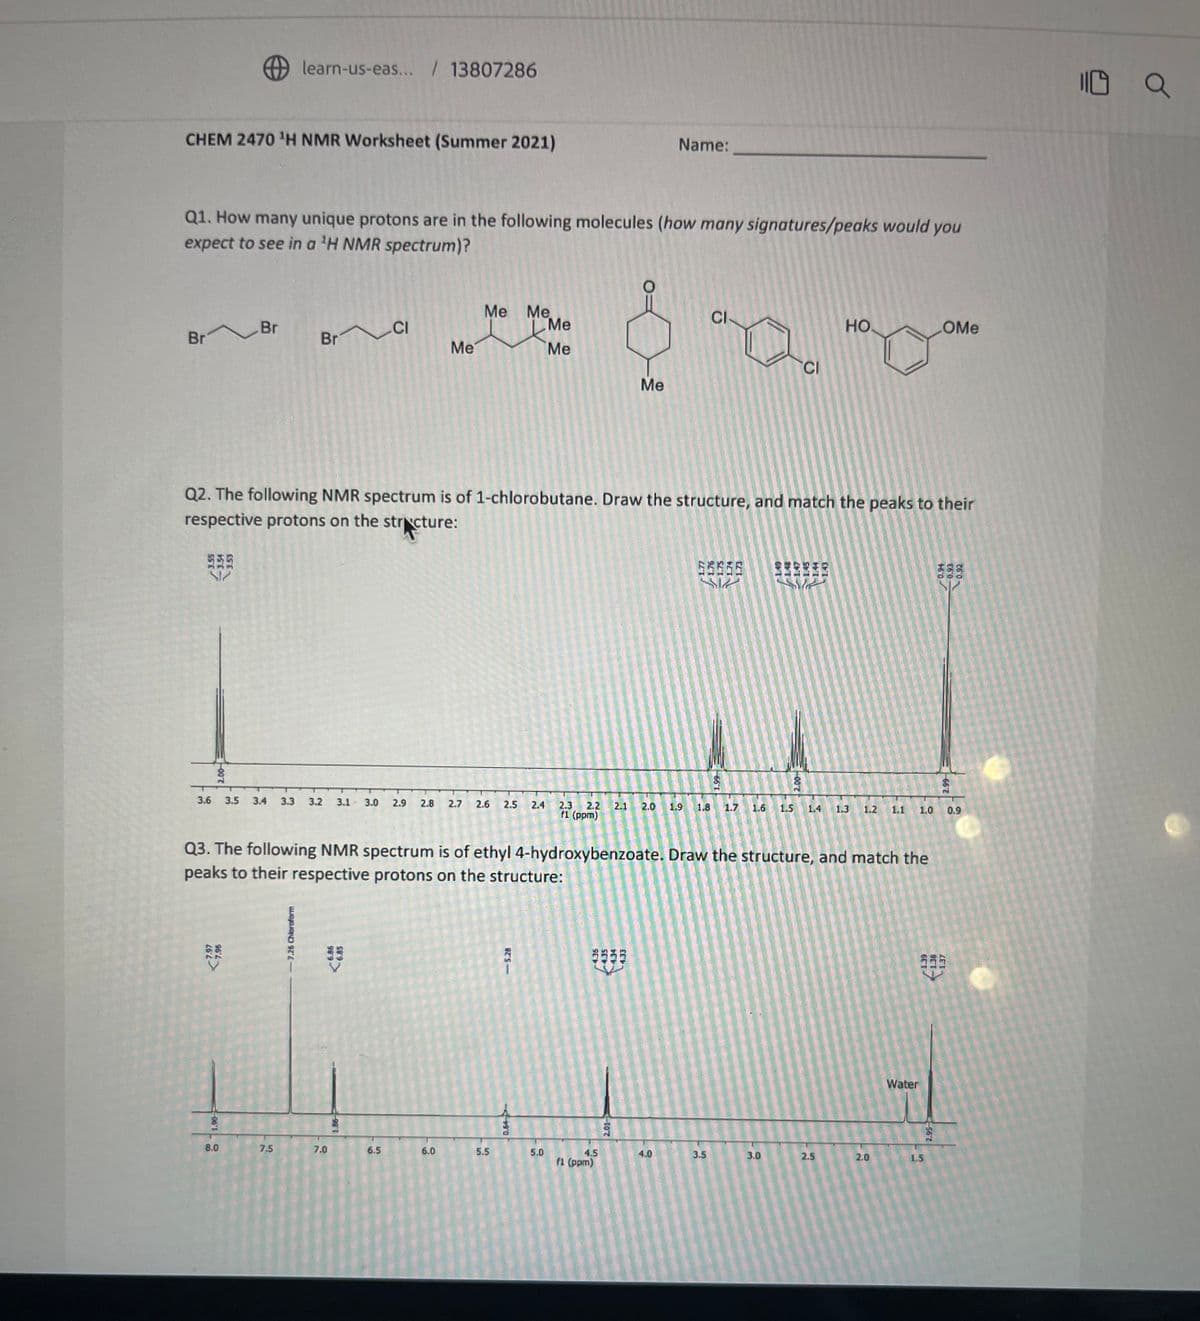 CHEM 2470 ¹H NMR Worksheet (Summer 2021)
Br Br
Q1. How many unique protons are in the following molecules (how many signatures/peaks would you
expect to see in a ¹H NMR spectrum)?
2.00
learn-us-eas... /13807286
7.97
7.96
06'T O
8.0
Br
3.6 3.5 3.4 3.3 3.2 3.1 3.0 2.9 2.8 2.7 2.6 2.5
7.5
-7.26 Chloroform
6.86
6.85
CI
Q2. The following NMR spectrum is of 1-chlorobutane. Draw the structure, and match the peaks to their
respective protons on the structure:
35995
7.0
1.86
Me
6.5
Me Me
6.0
5.5
- 5.28
2.4
<-4+9:0
Me
Me
Q3. The following NMR spectrum is of ethyl 4-hydroxybenzoate. Draw the structure, and match the
peaks to their respective protons on the structure:
5.0
Me
Name:
4.5
f1 (ppm)
2.3 2.2 2.1 2.0 1.9 1.8
f1 (ppm)
2.01-
4.0
CI
EEEEE
3.5
سیا
66 1
1.48
CI
3.0
لیے سرا
2.00
НО.
1.6 1.5 1.4 1.3 1.2 1.1 1.0
2.5
2.0
Water
COMe
1.5
2.95
0.94
-0.93
-0.92
1.39
138
1.37
2.99
0.9